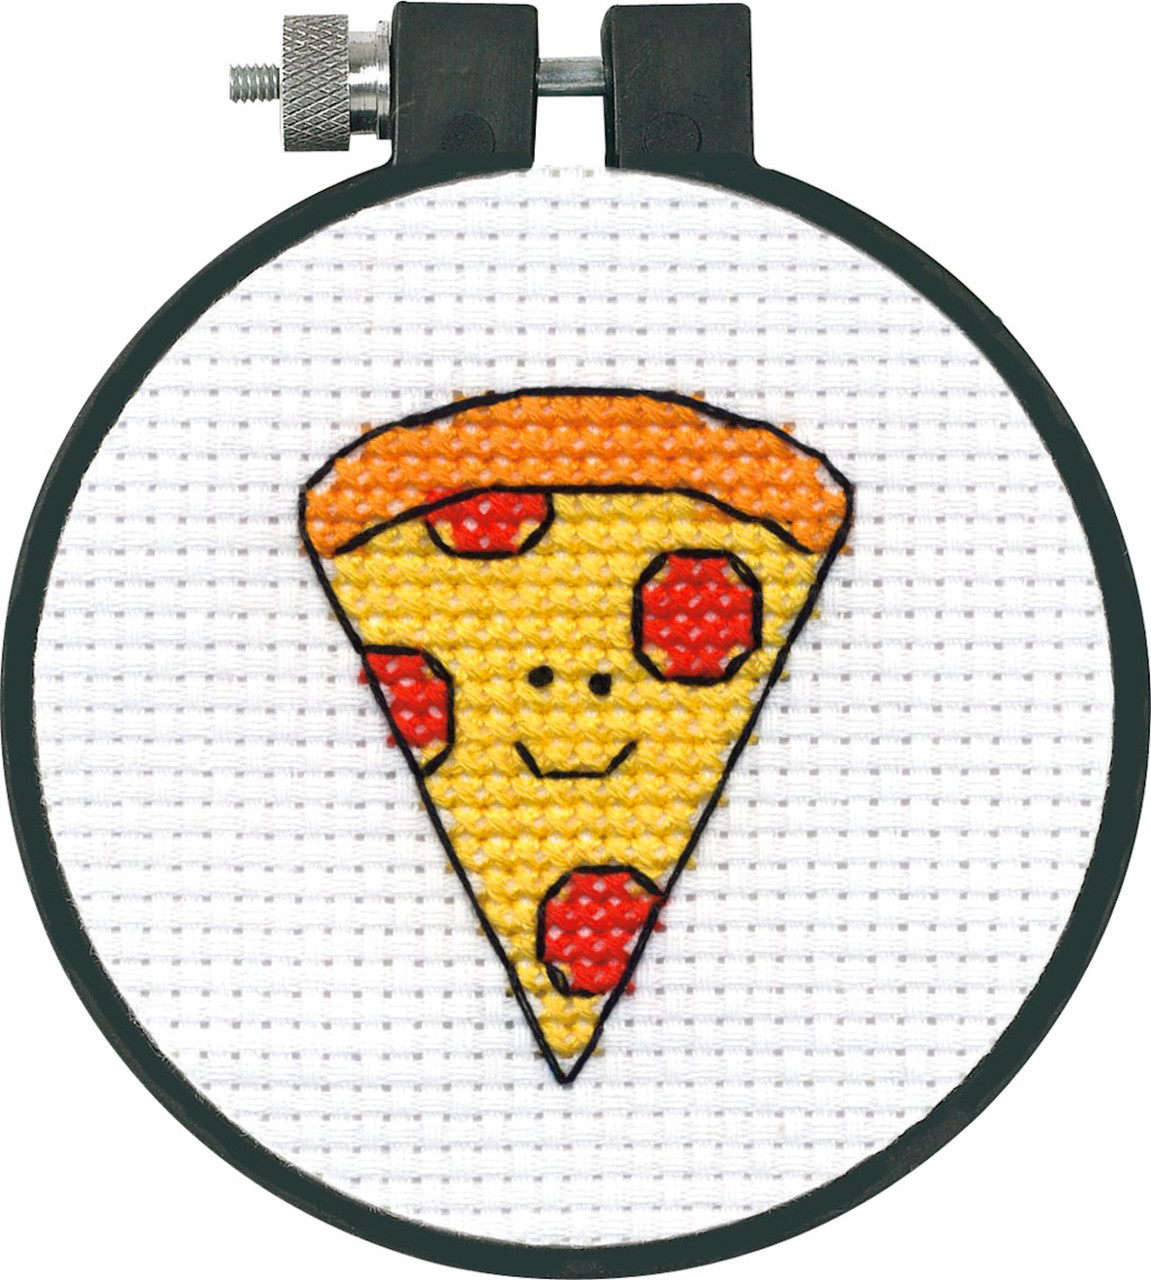 Learn a Craft - Happy Pizza